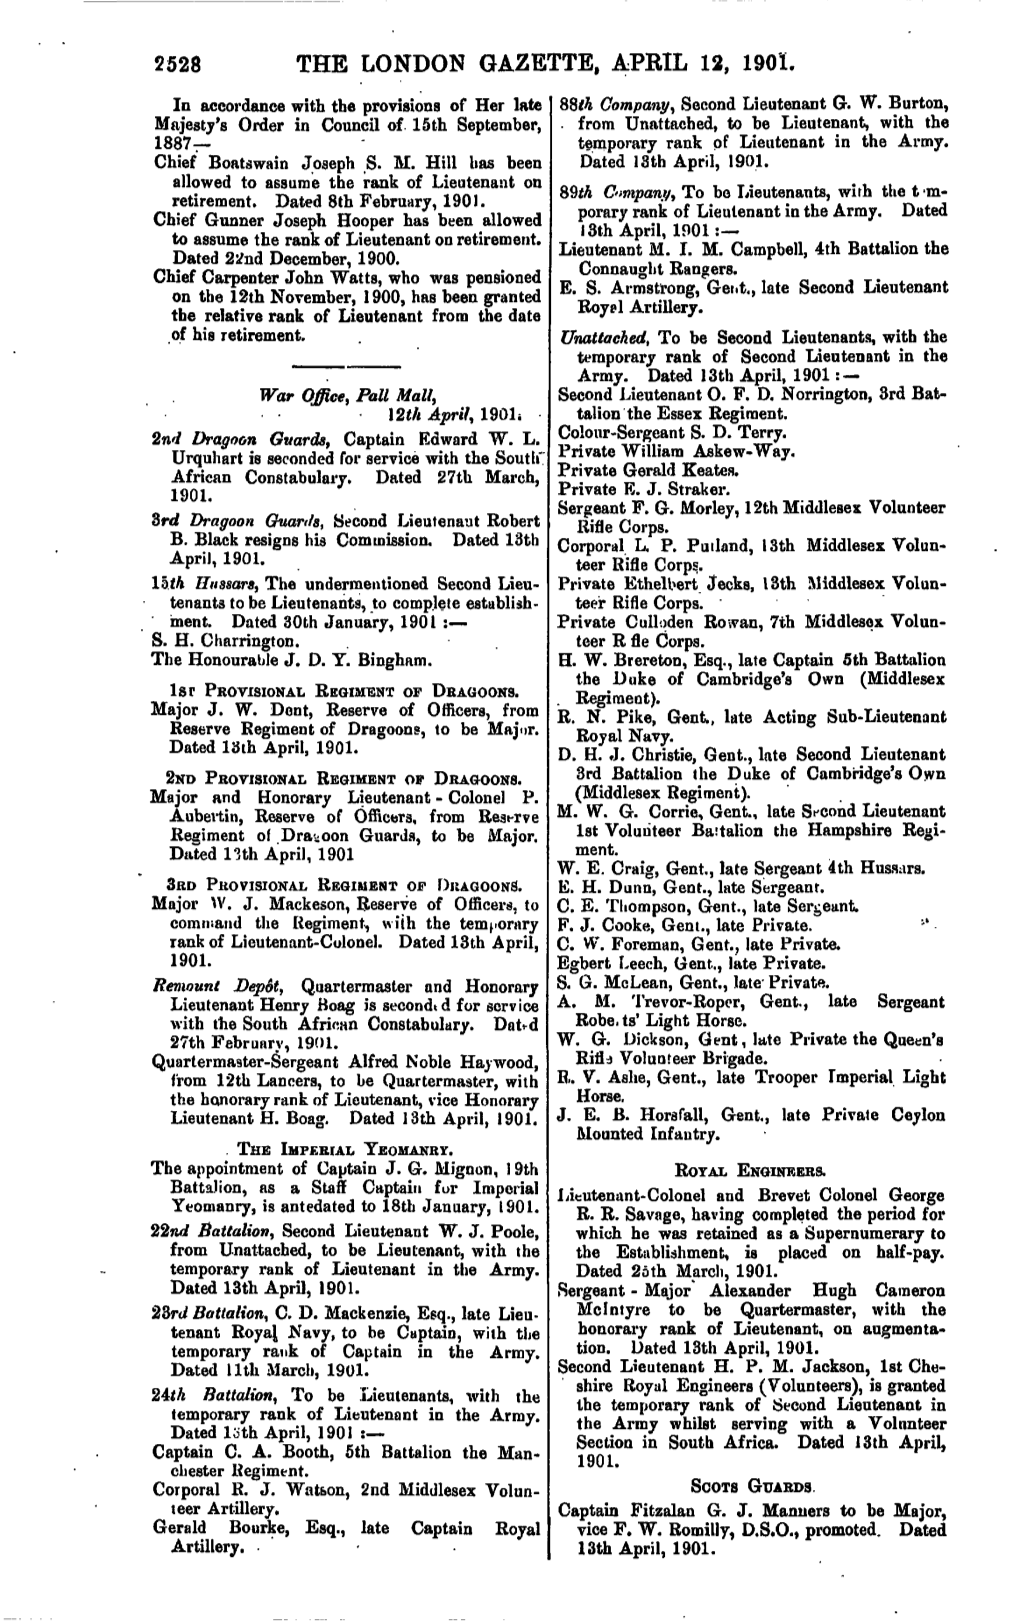 THE LONDON GAZETTE, APRIL 12, 1901. in Accordance with the Provisions of Her Late 88Th Company, Second Lieutenant G